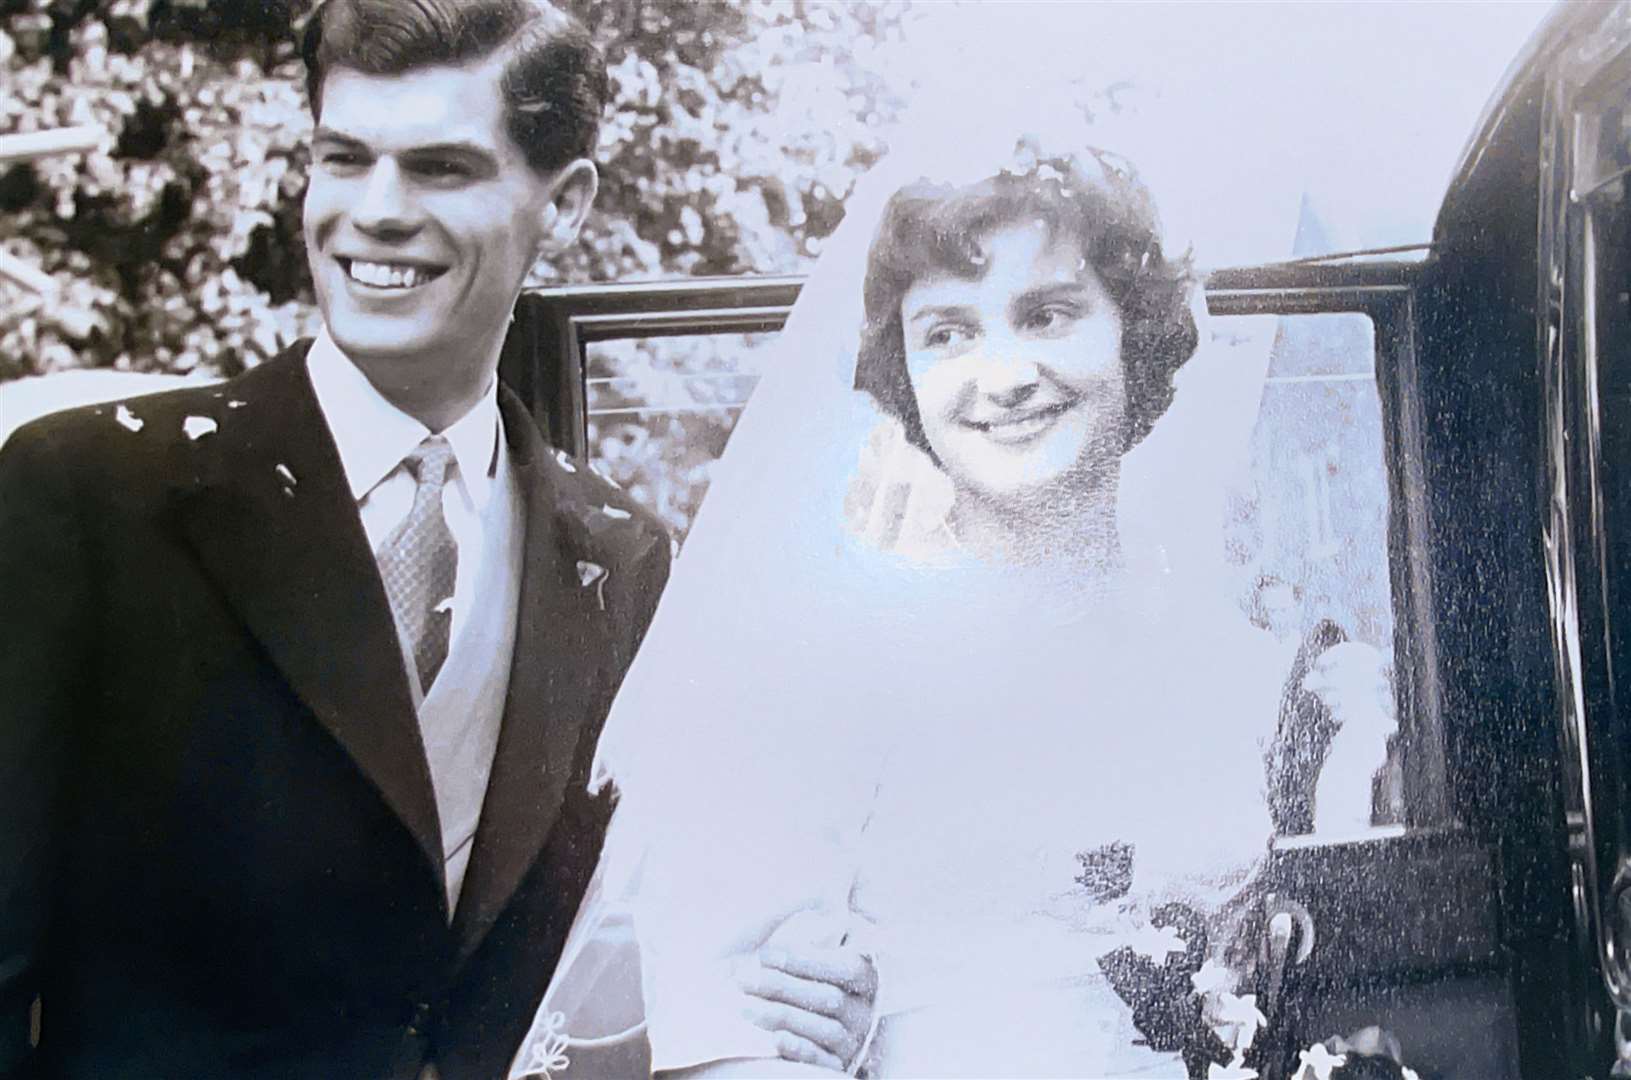 David and Ursula Riceman on their wedding day in 1960. Photo: Riceman family